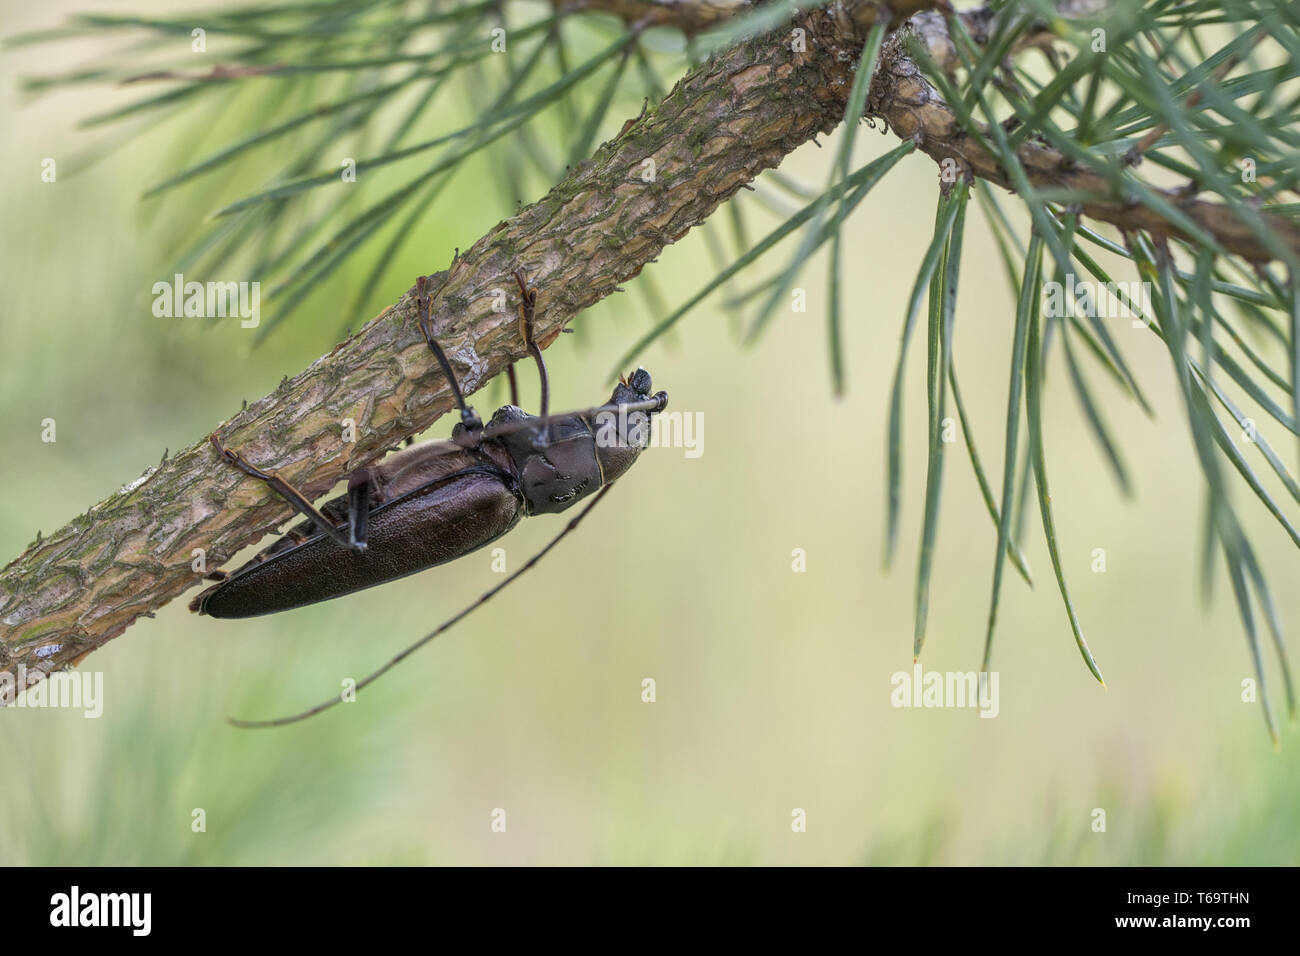 Longhorn beetle on a tree branch, Ergates faber Stock Photo